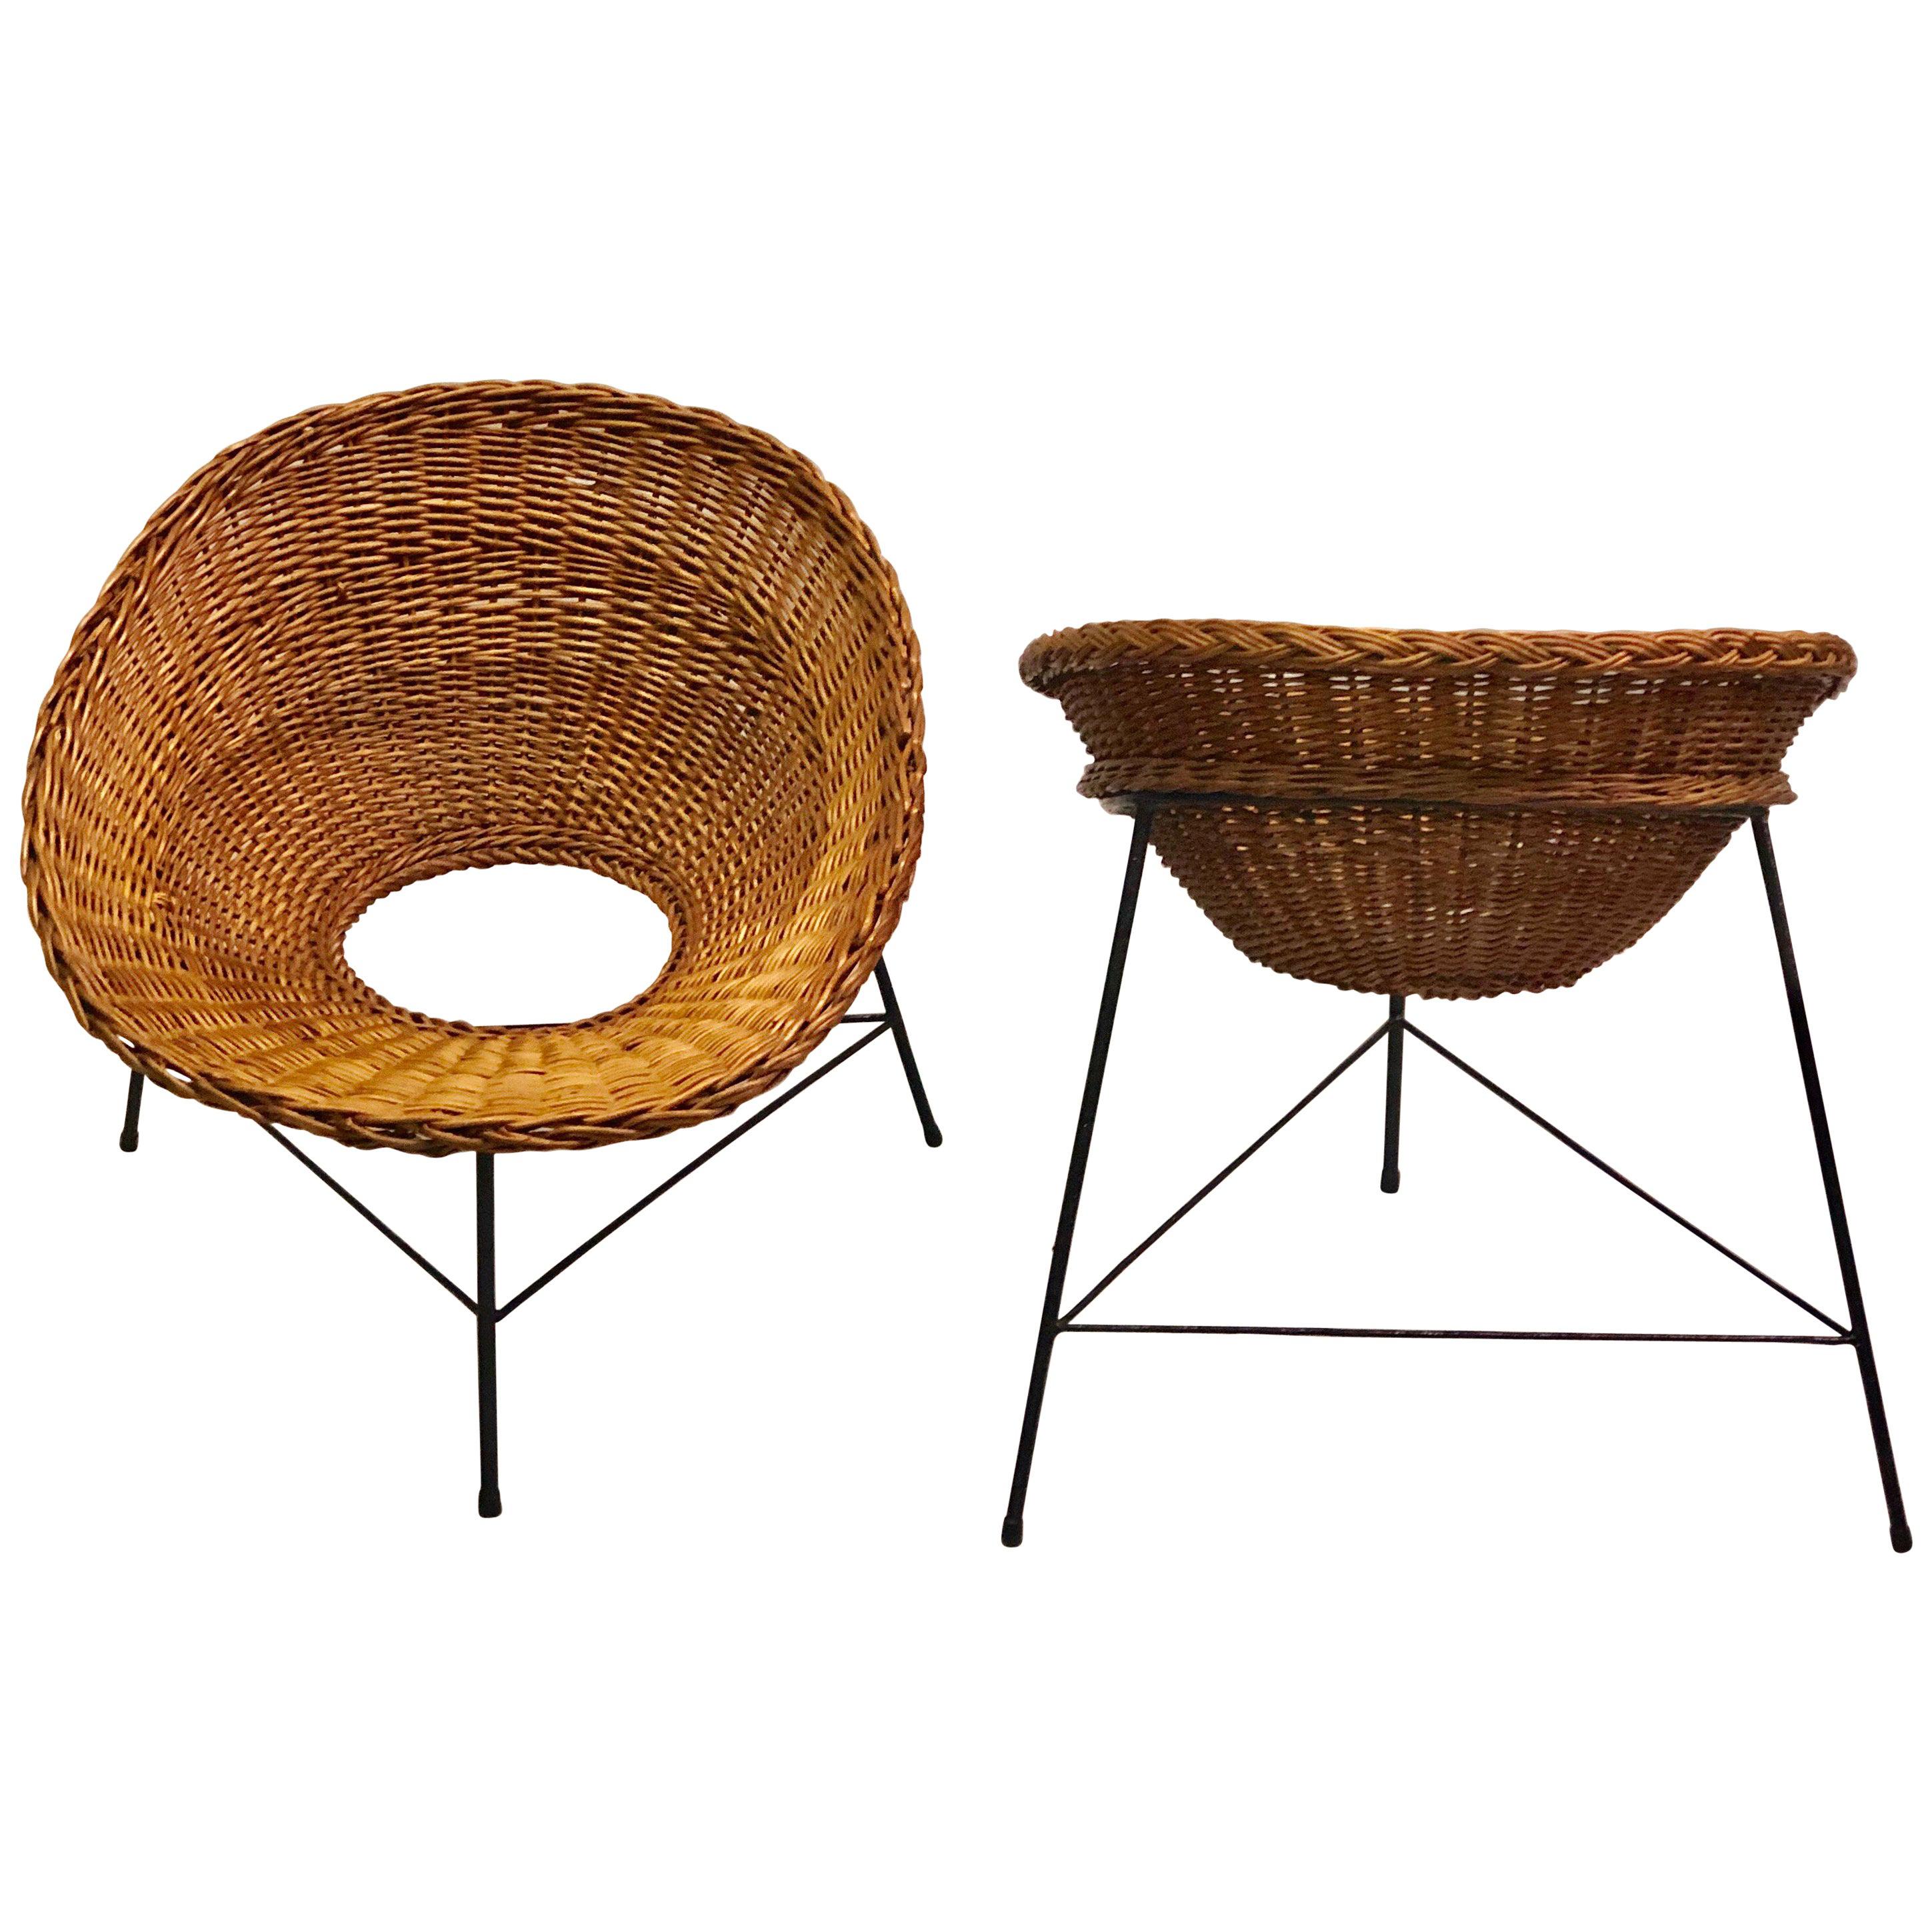 Italian Mid-century Iron and Rattan Lounge Chairs Augusto Bozzi Attributed, Pair